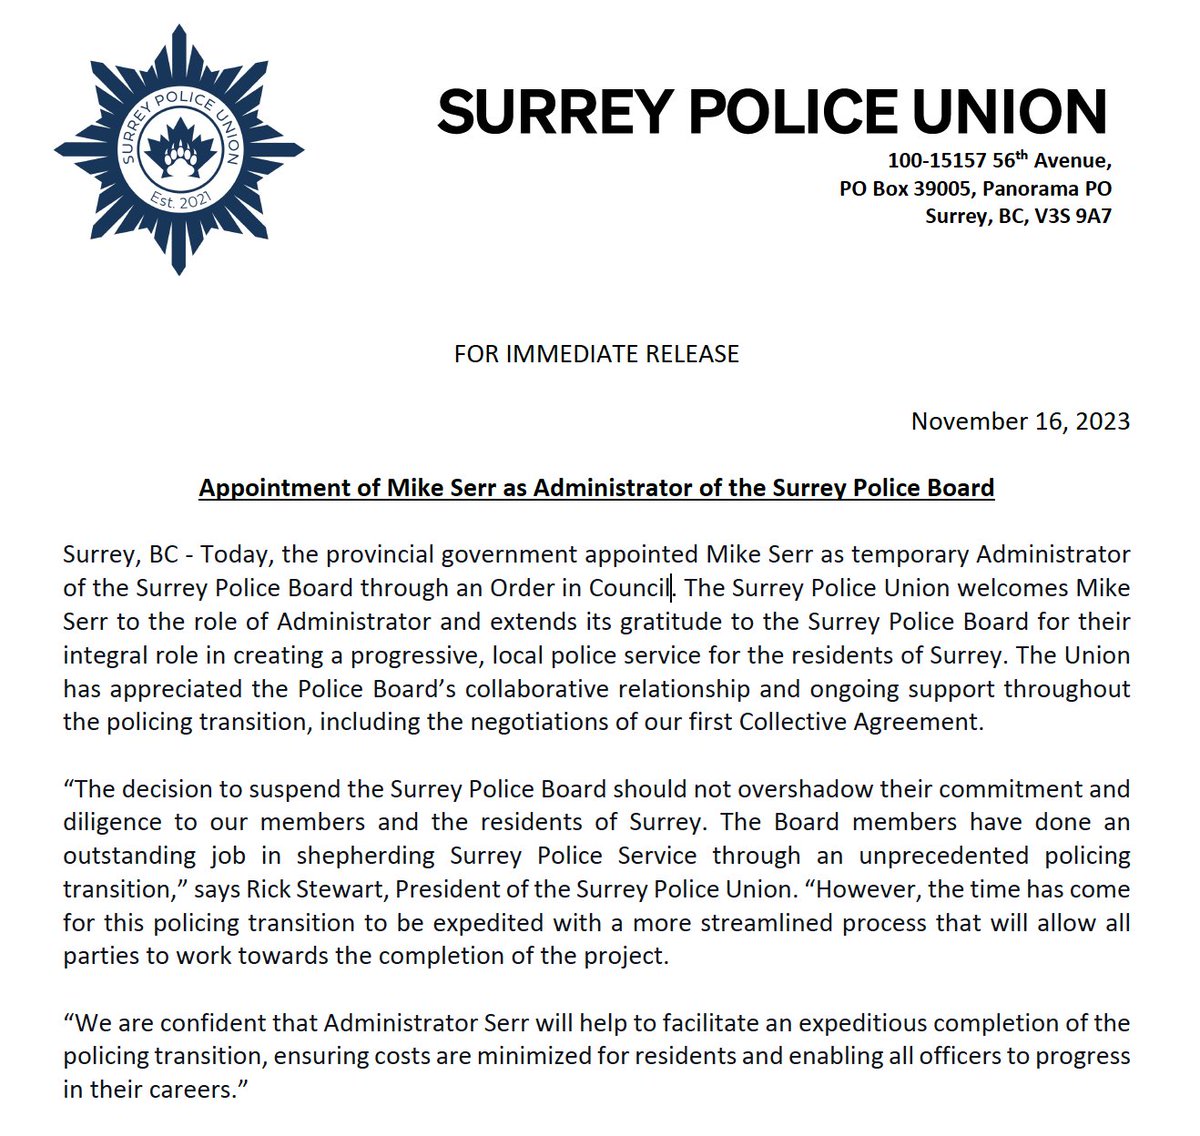 We welcome the appointment of Mike Serr as temporary Administrator of the @SPSBoard. We are confident that Administrator Serr will help to facilitate an expeditious completion of the policing transition in #SurreyBC.